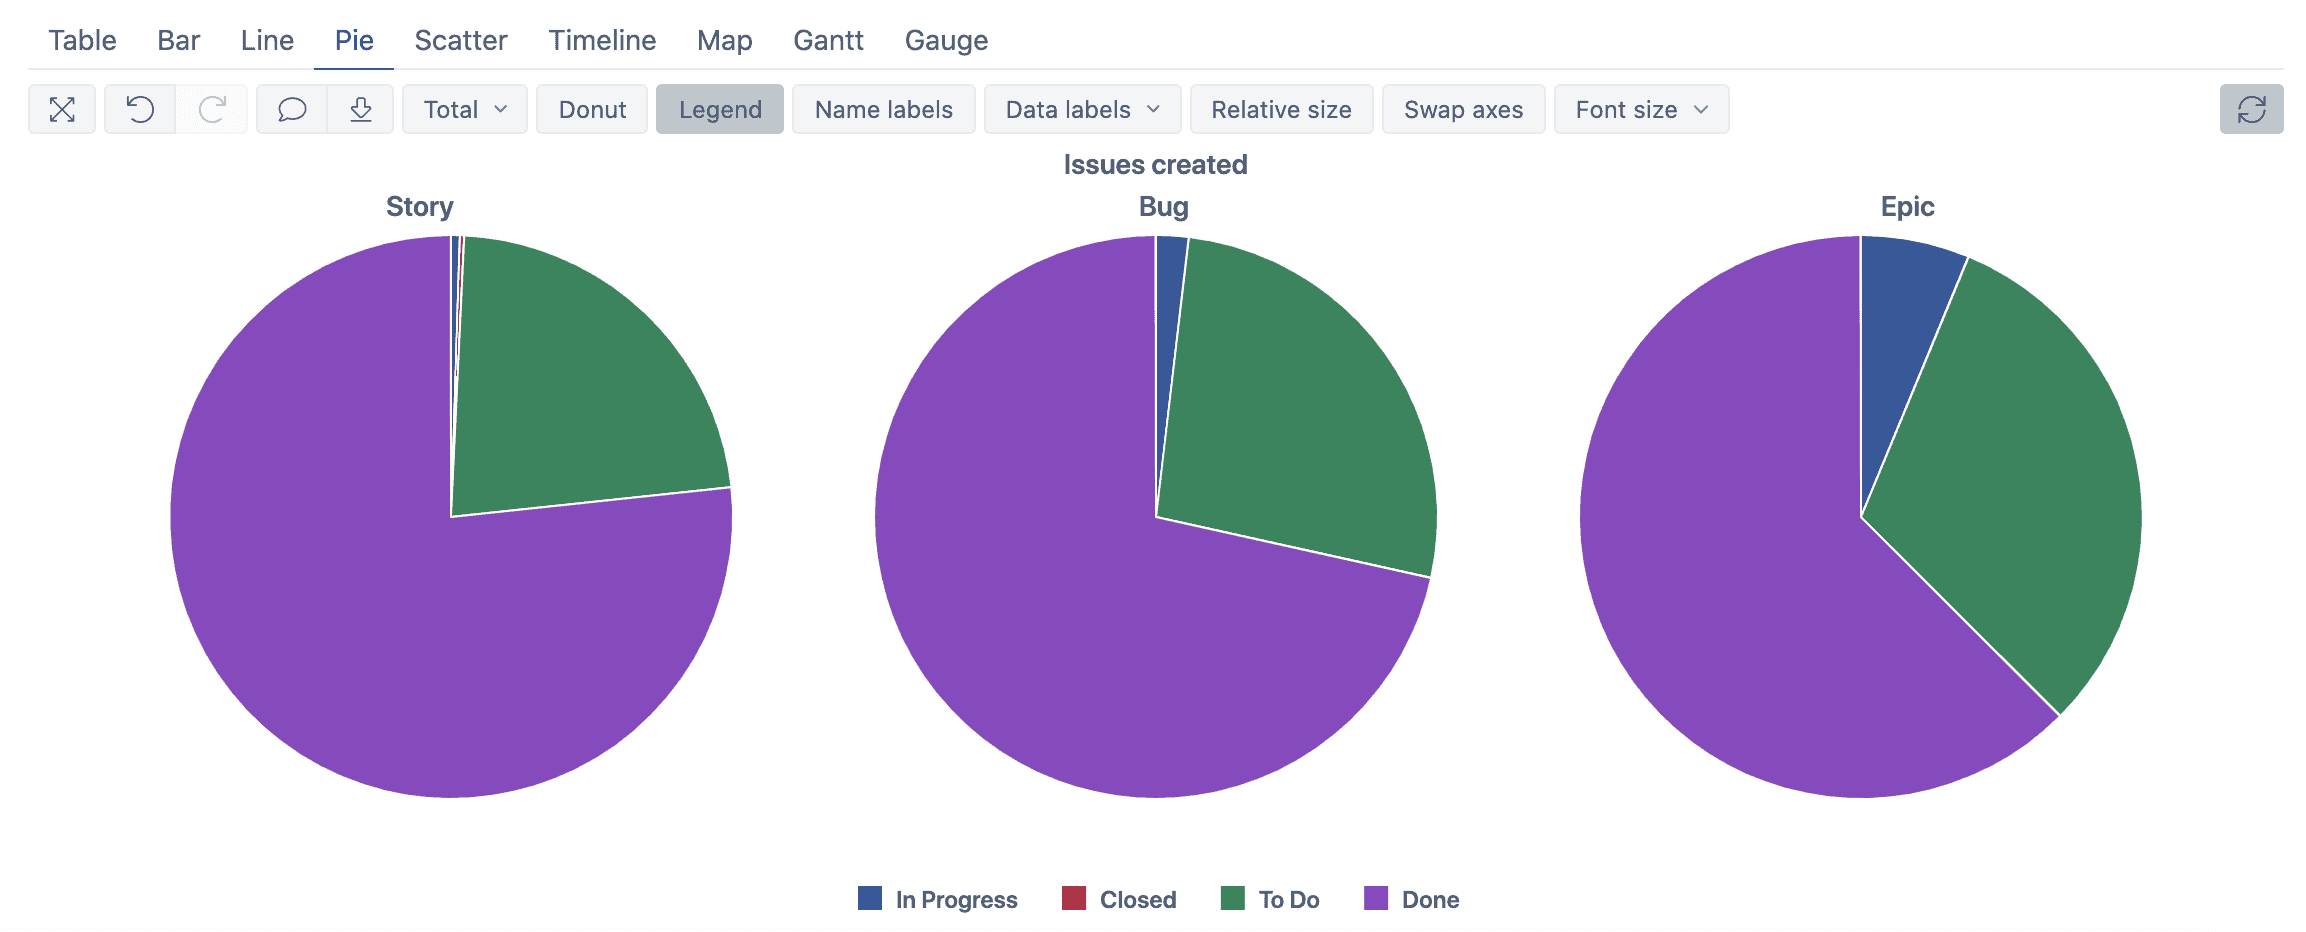 issue created pie chart in eazybi